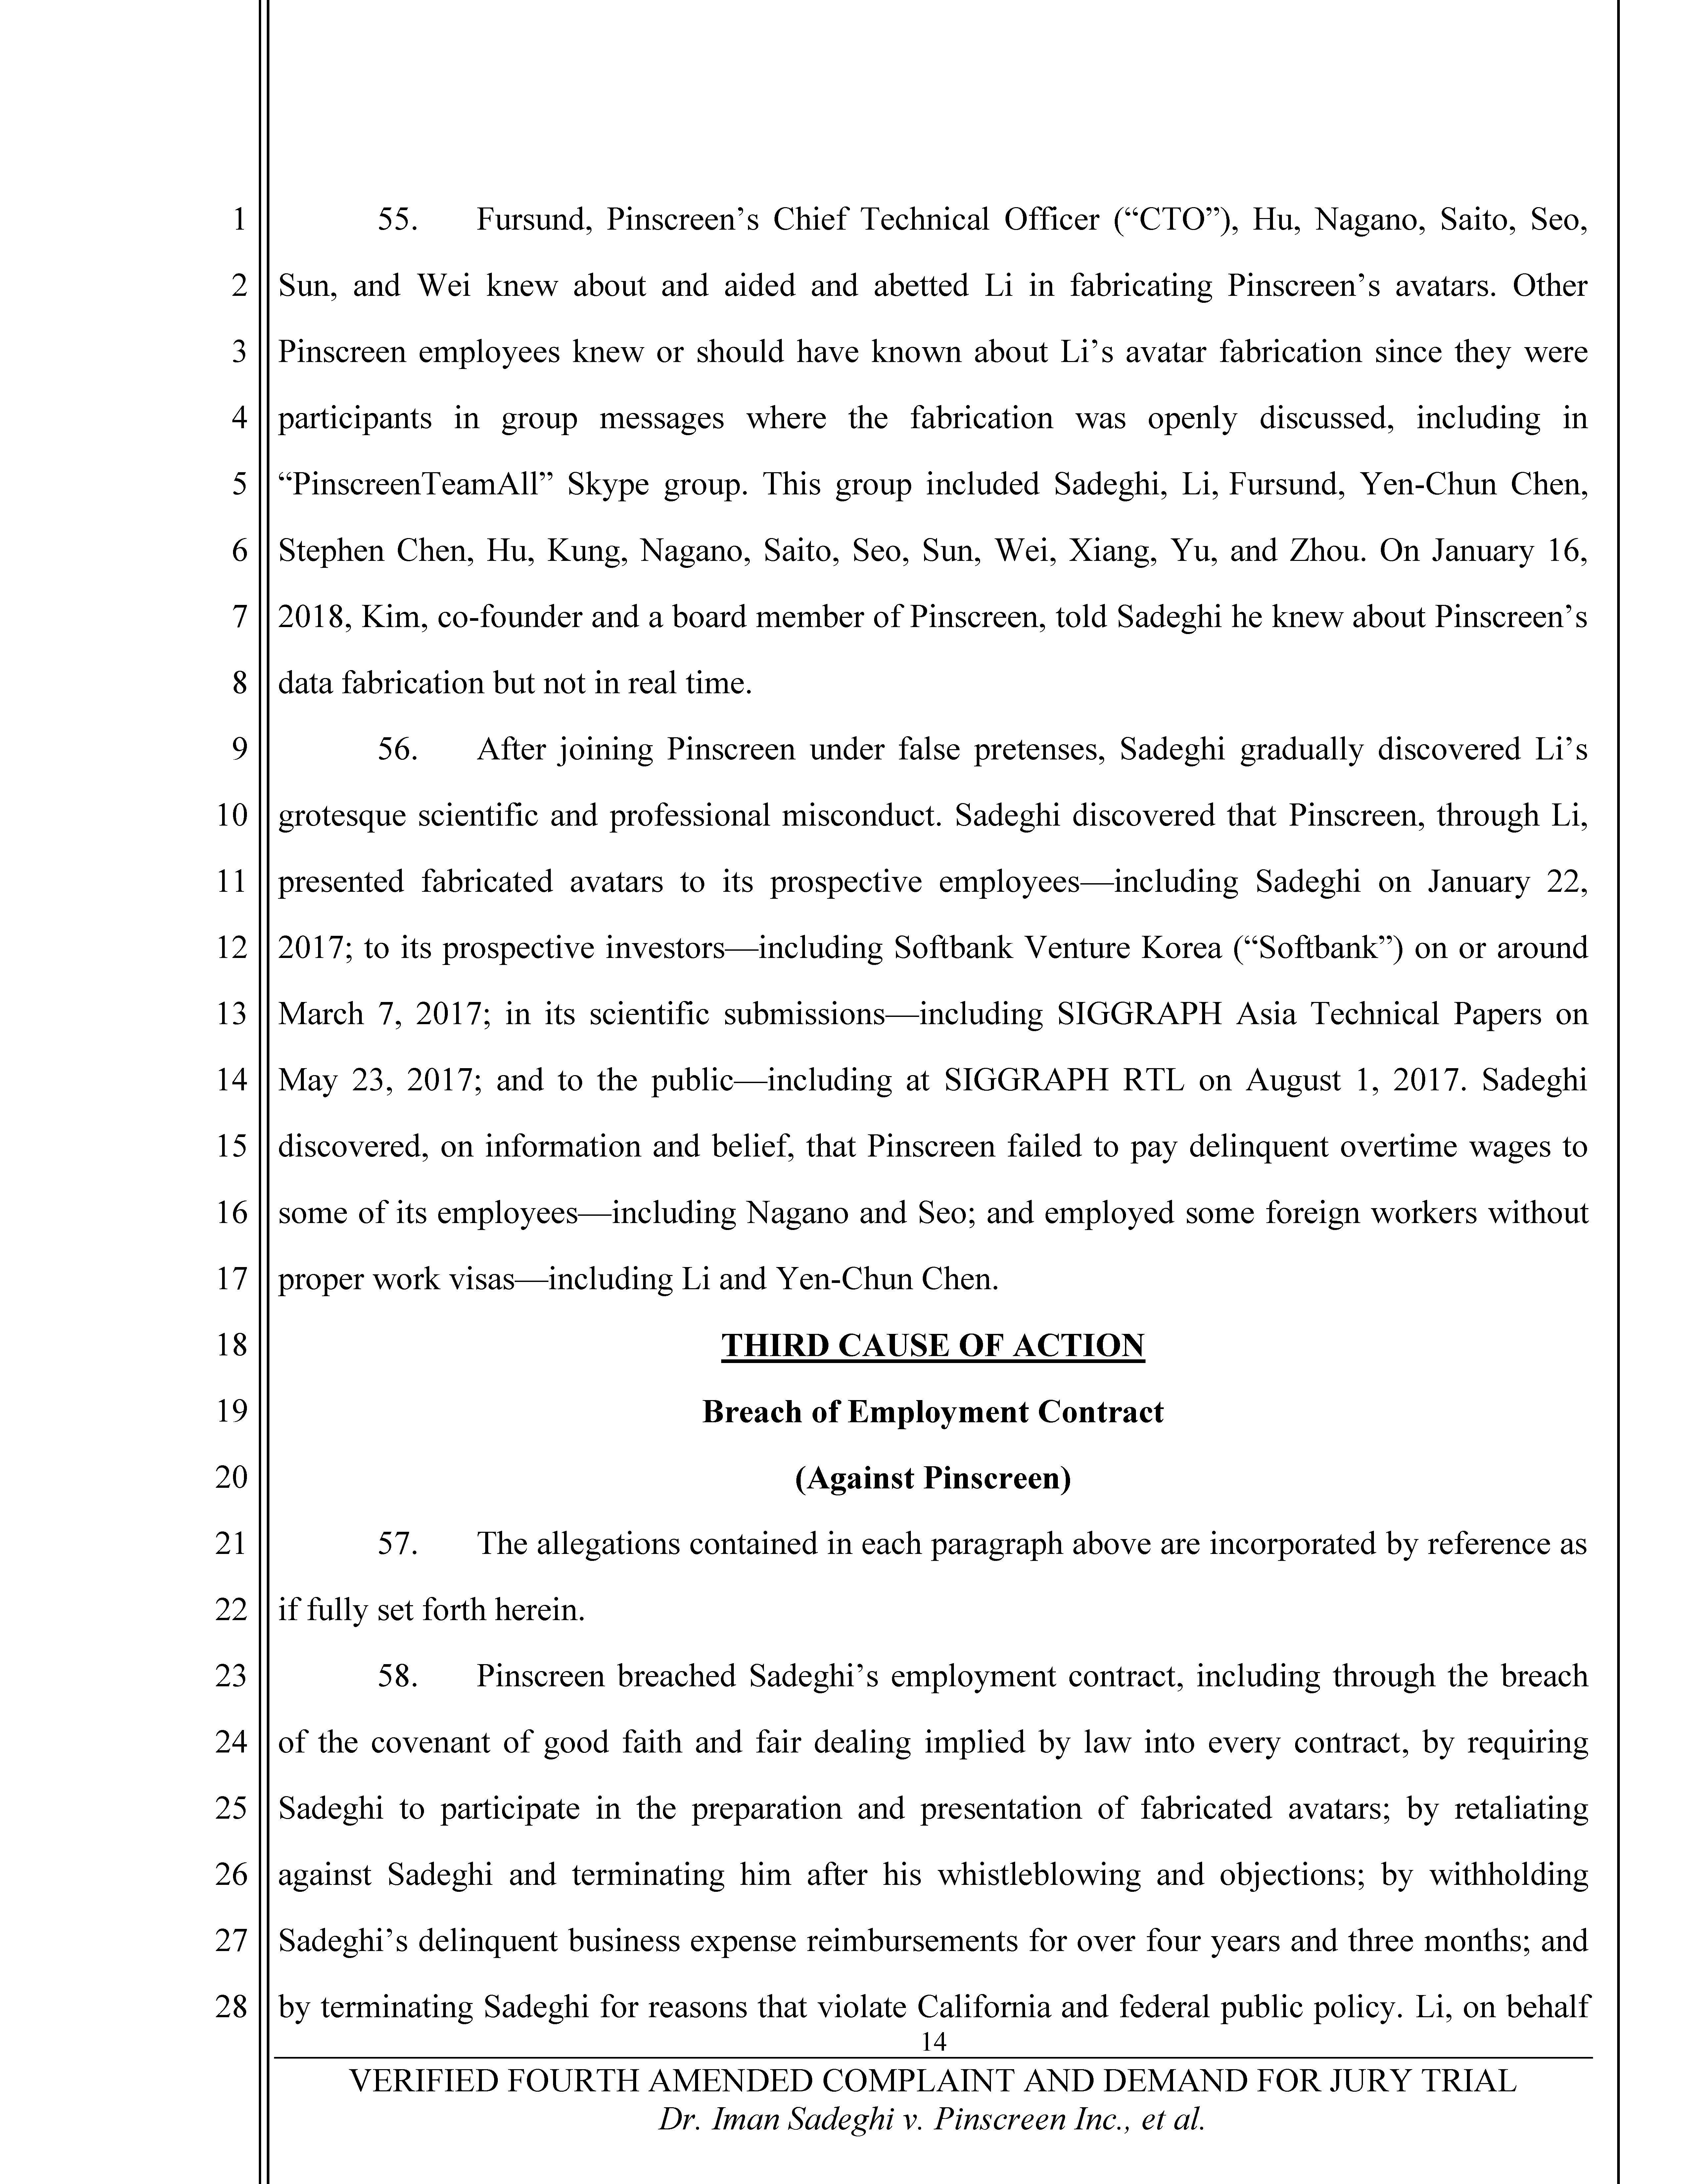 Fourth Amended Complaint (4AC) Page 15